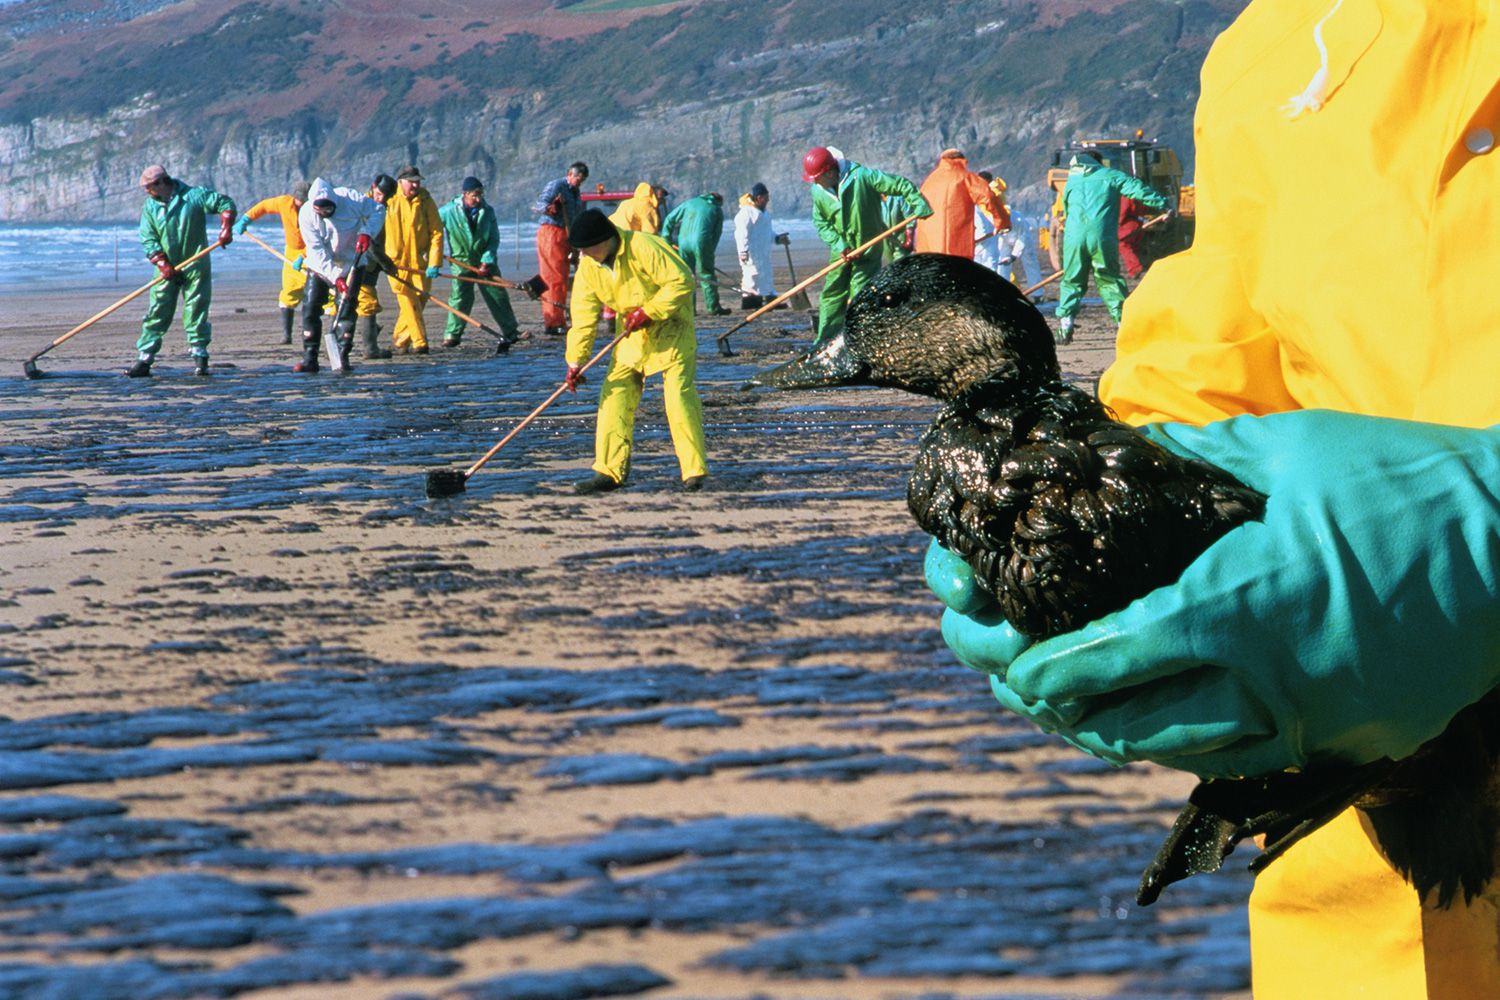 Cleaning up animals after an oil spill is feel good propaganda to make the public think they are helping. 90% of those animals will be dead within a few days or weeks. They've ingested enough of the oil that they are moving corpses, they (and you mr. nice person with a bottle of Dawn dish soap)just don't know it yet.

Real oil spill work is done by trained professional crews, not volunteers. If you ever tried to help, you were given busy work to keep you out of the way.